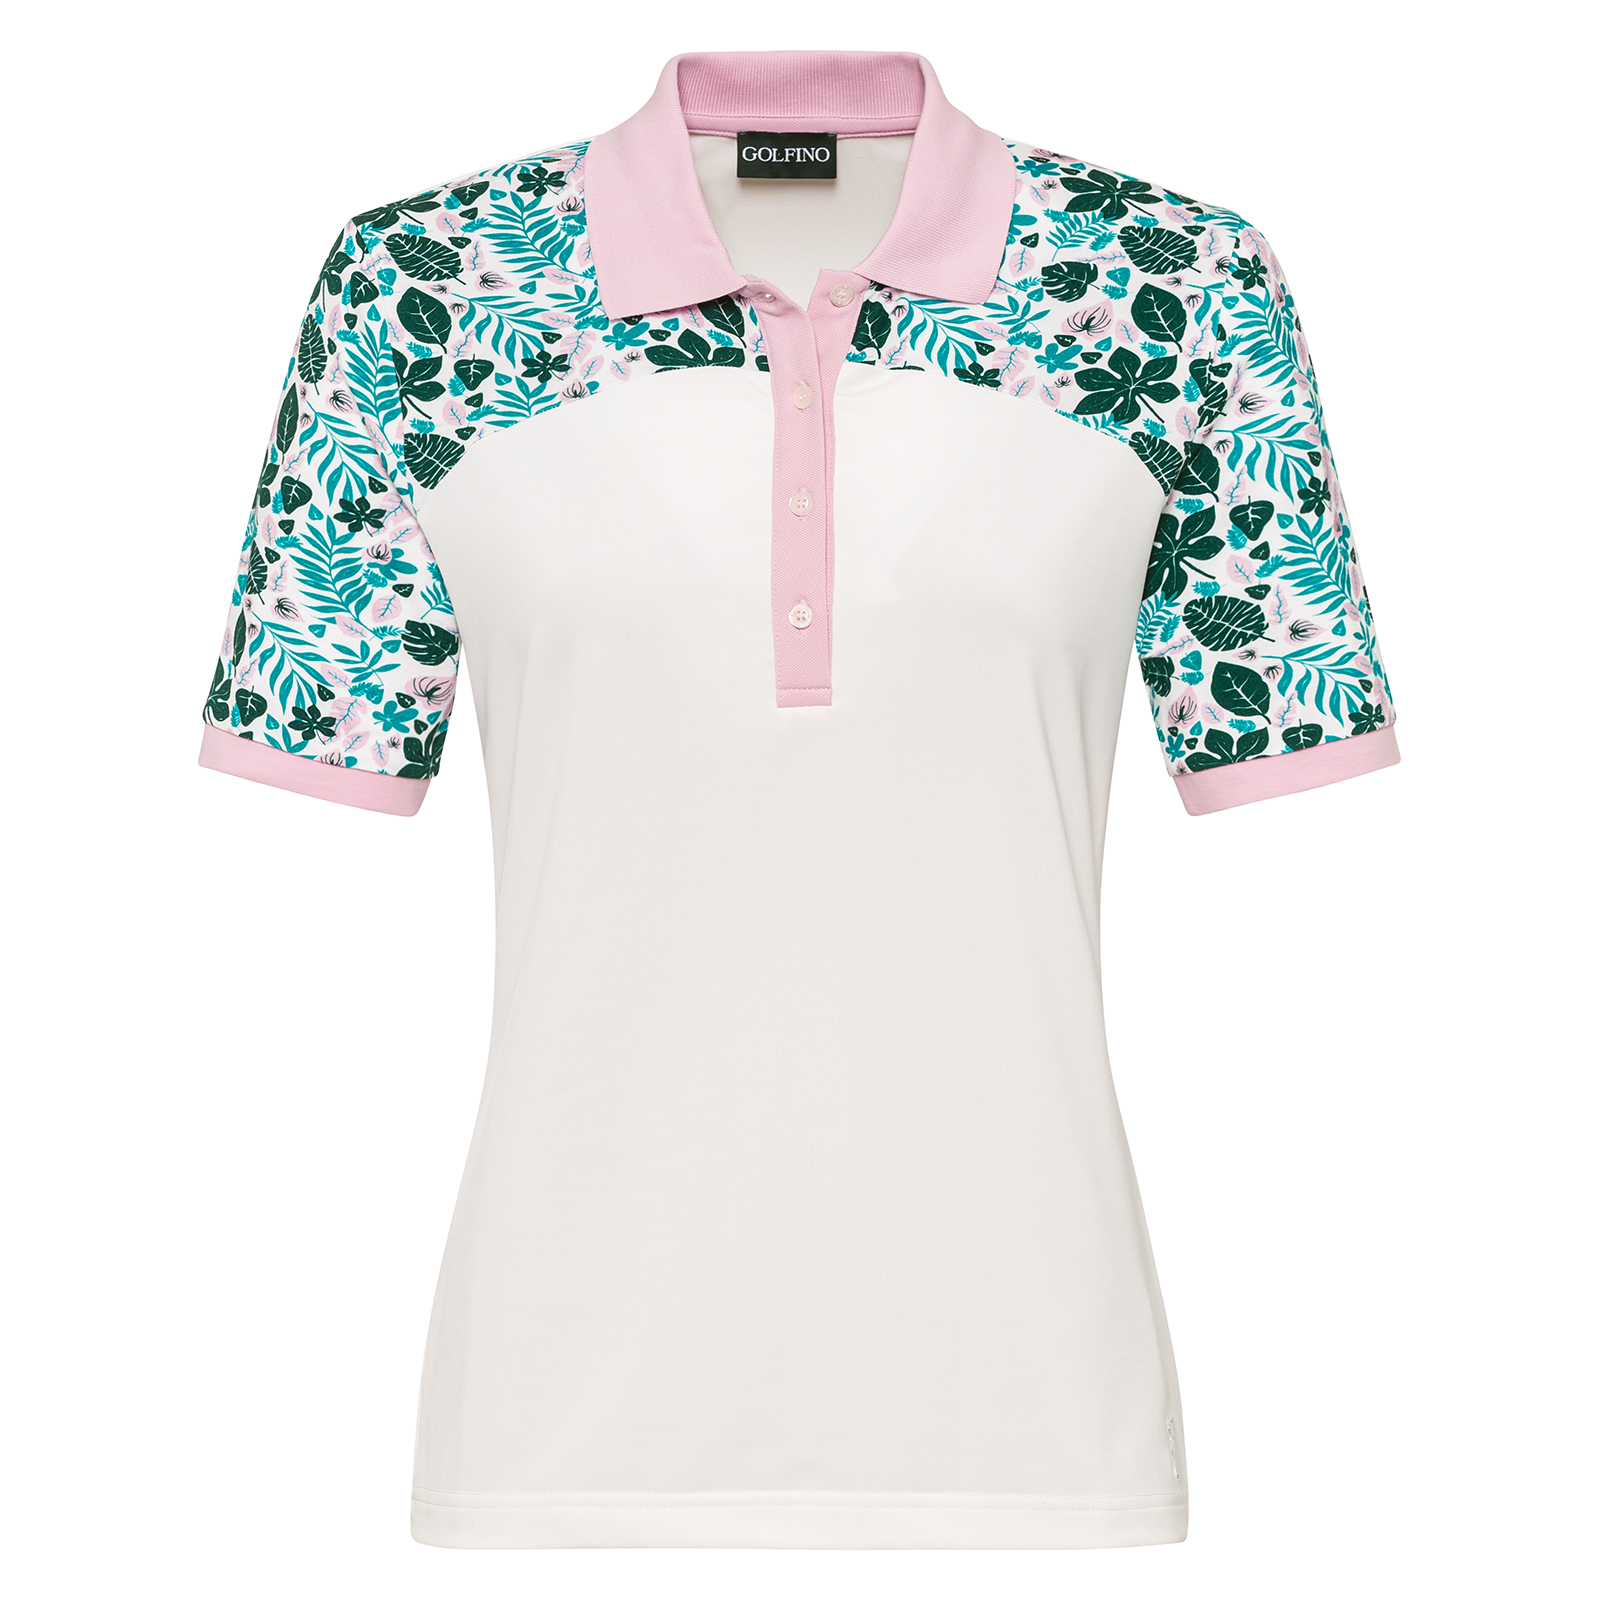 Ladies' golf polo shirt with printed elements 